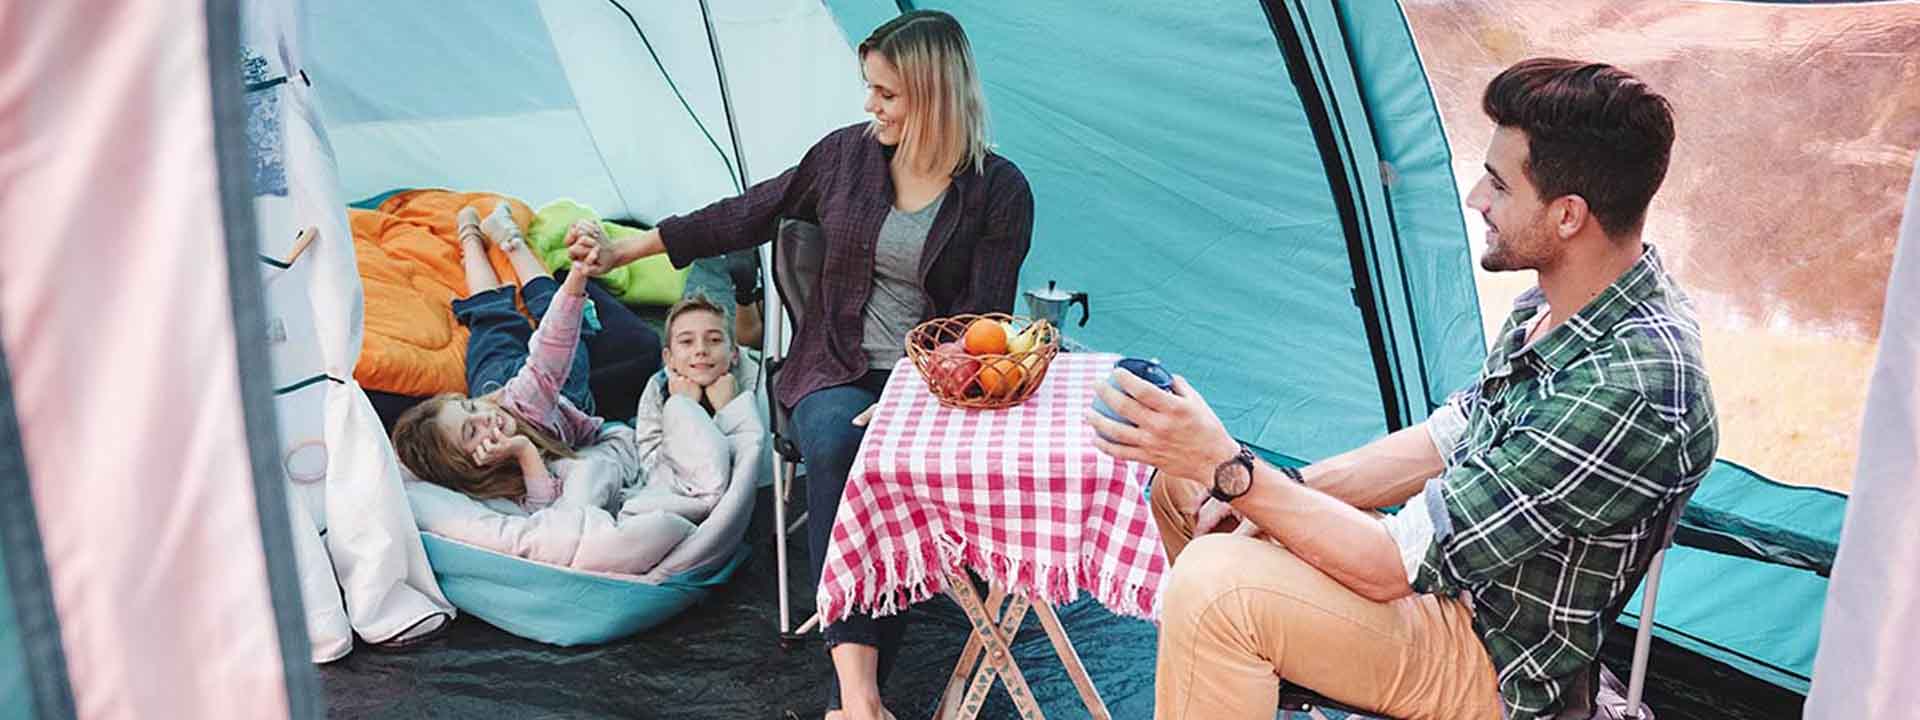 FAMILY CAMPING. WHAT TO BRING TO ENJOY THE EXPERIENCE?